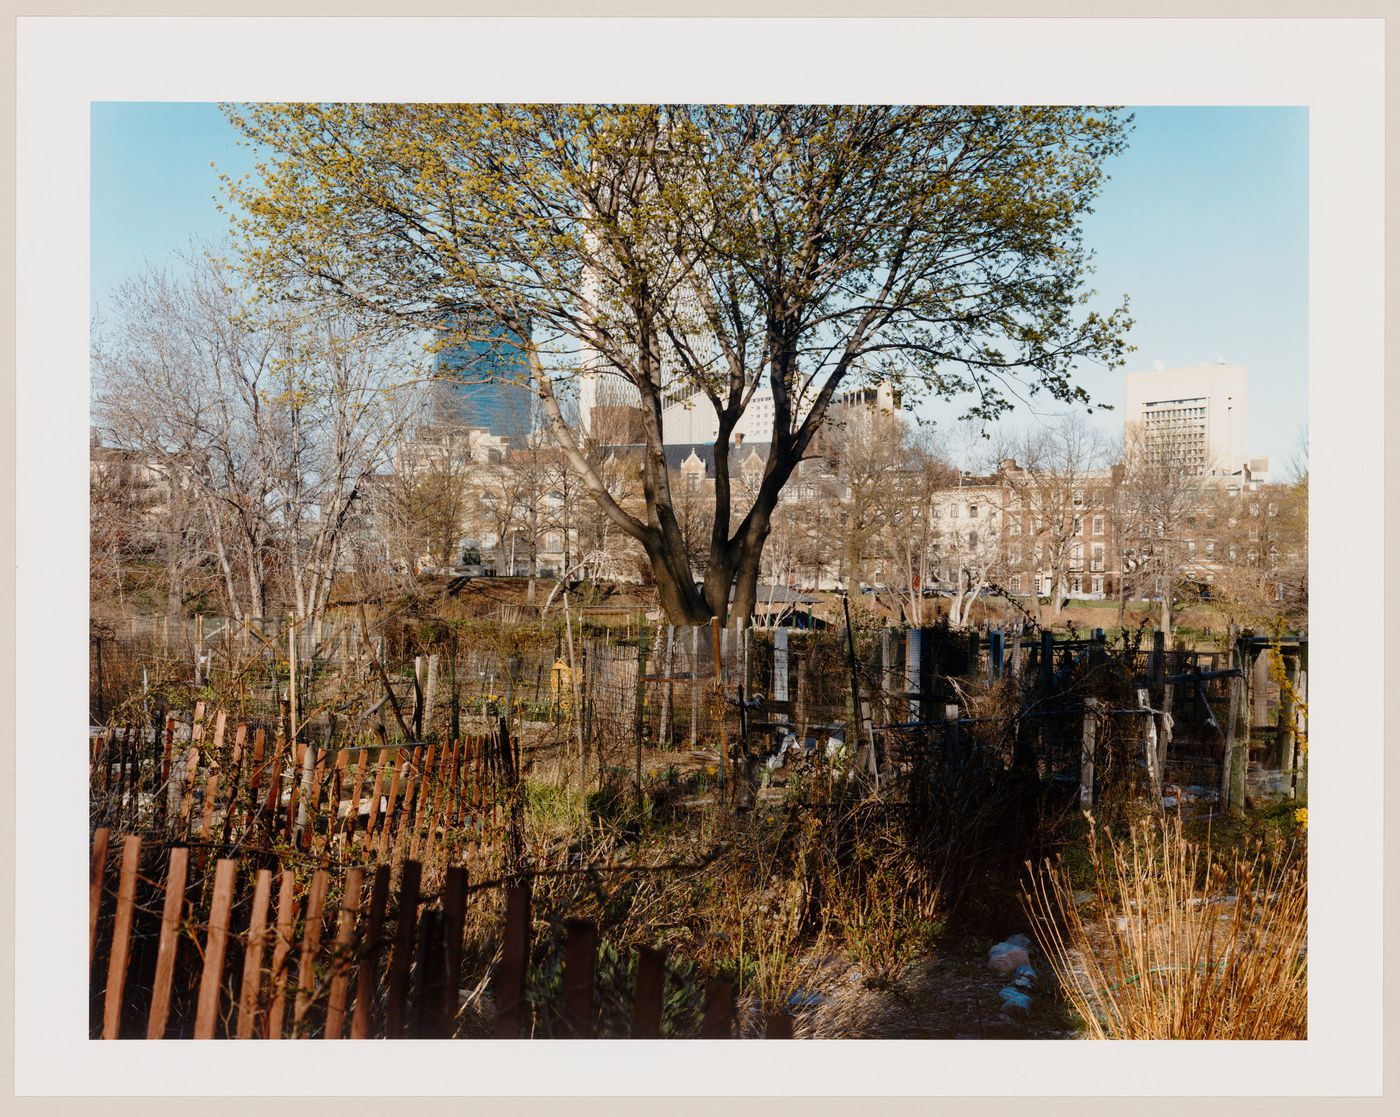 Viewing Olmsted: View from Victory Gardens, Back Bay Fens, Boston, Massachusetts